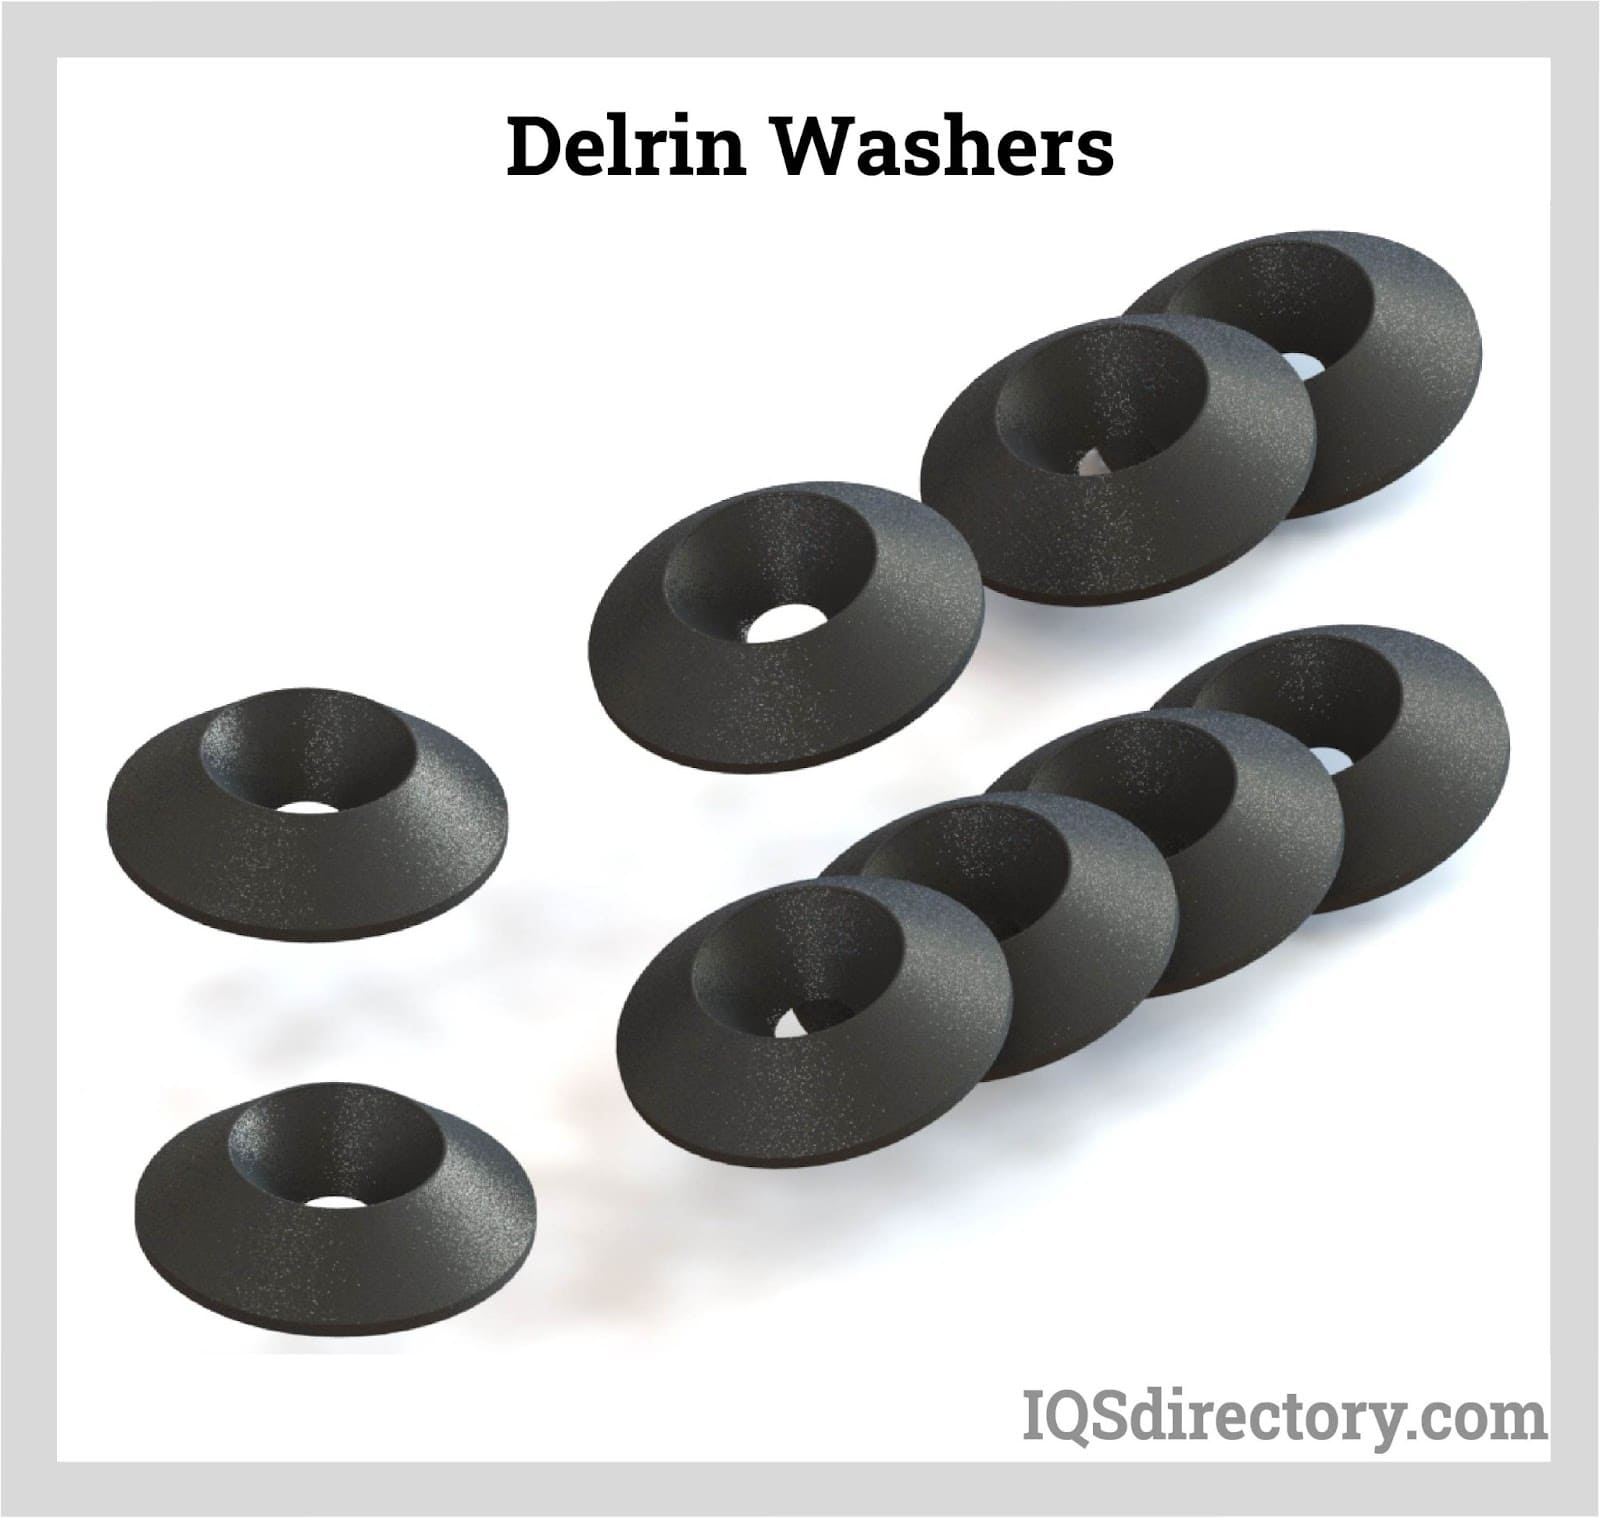 delrin washers